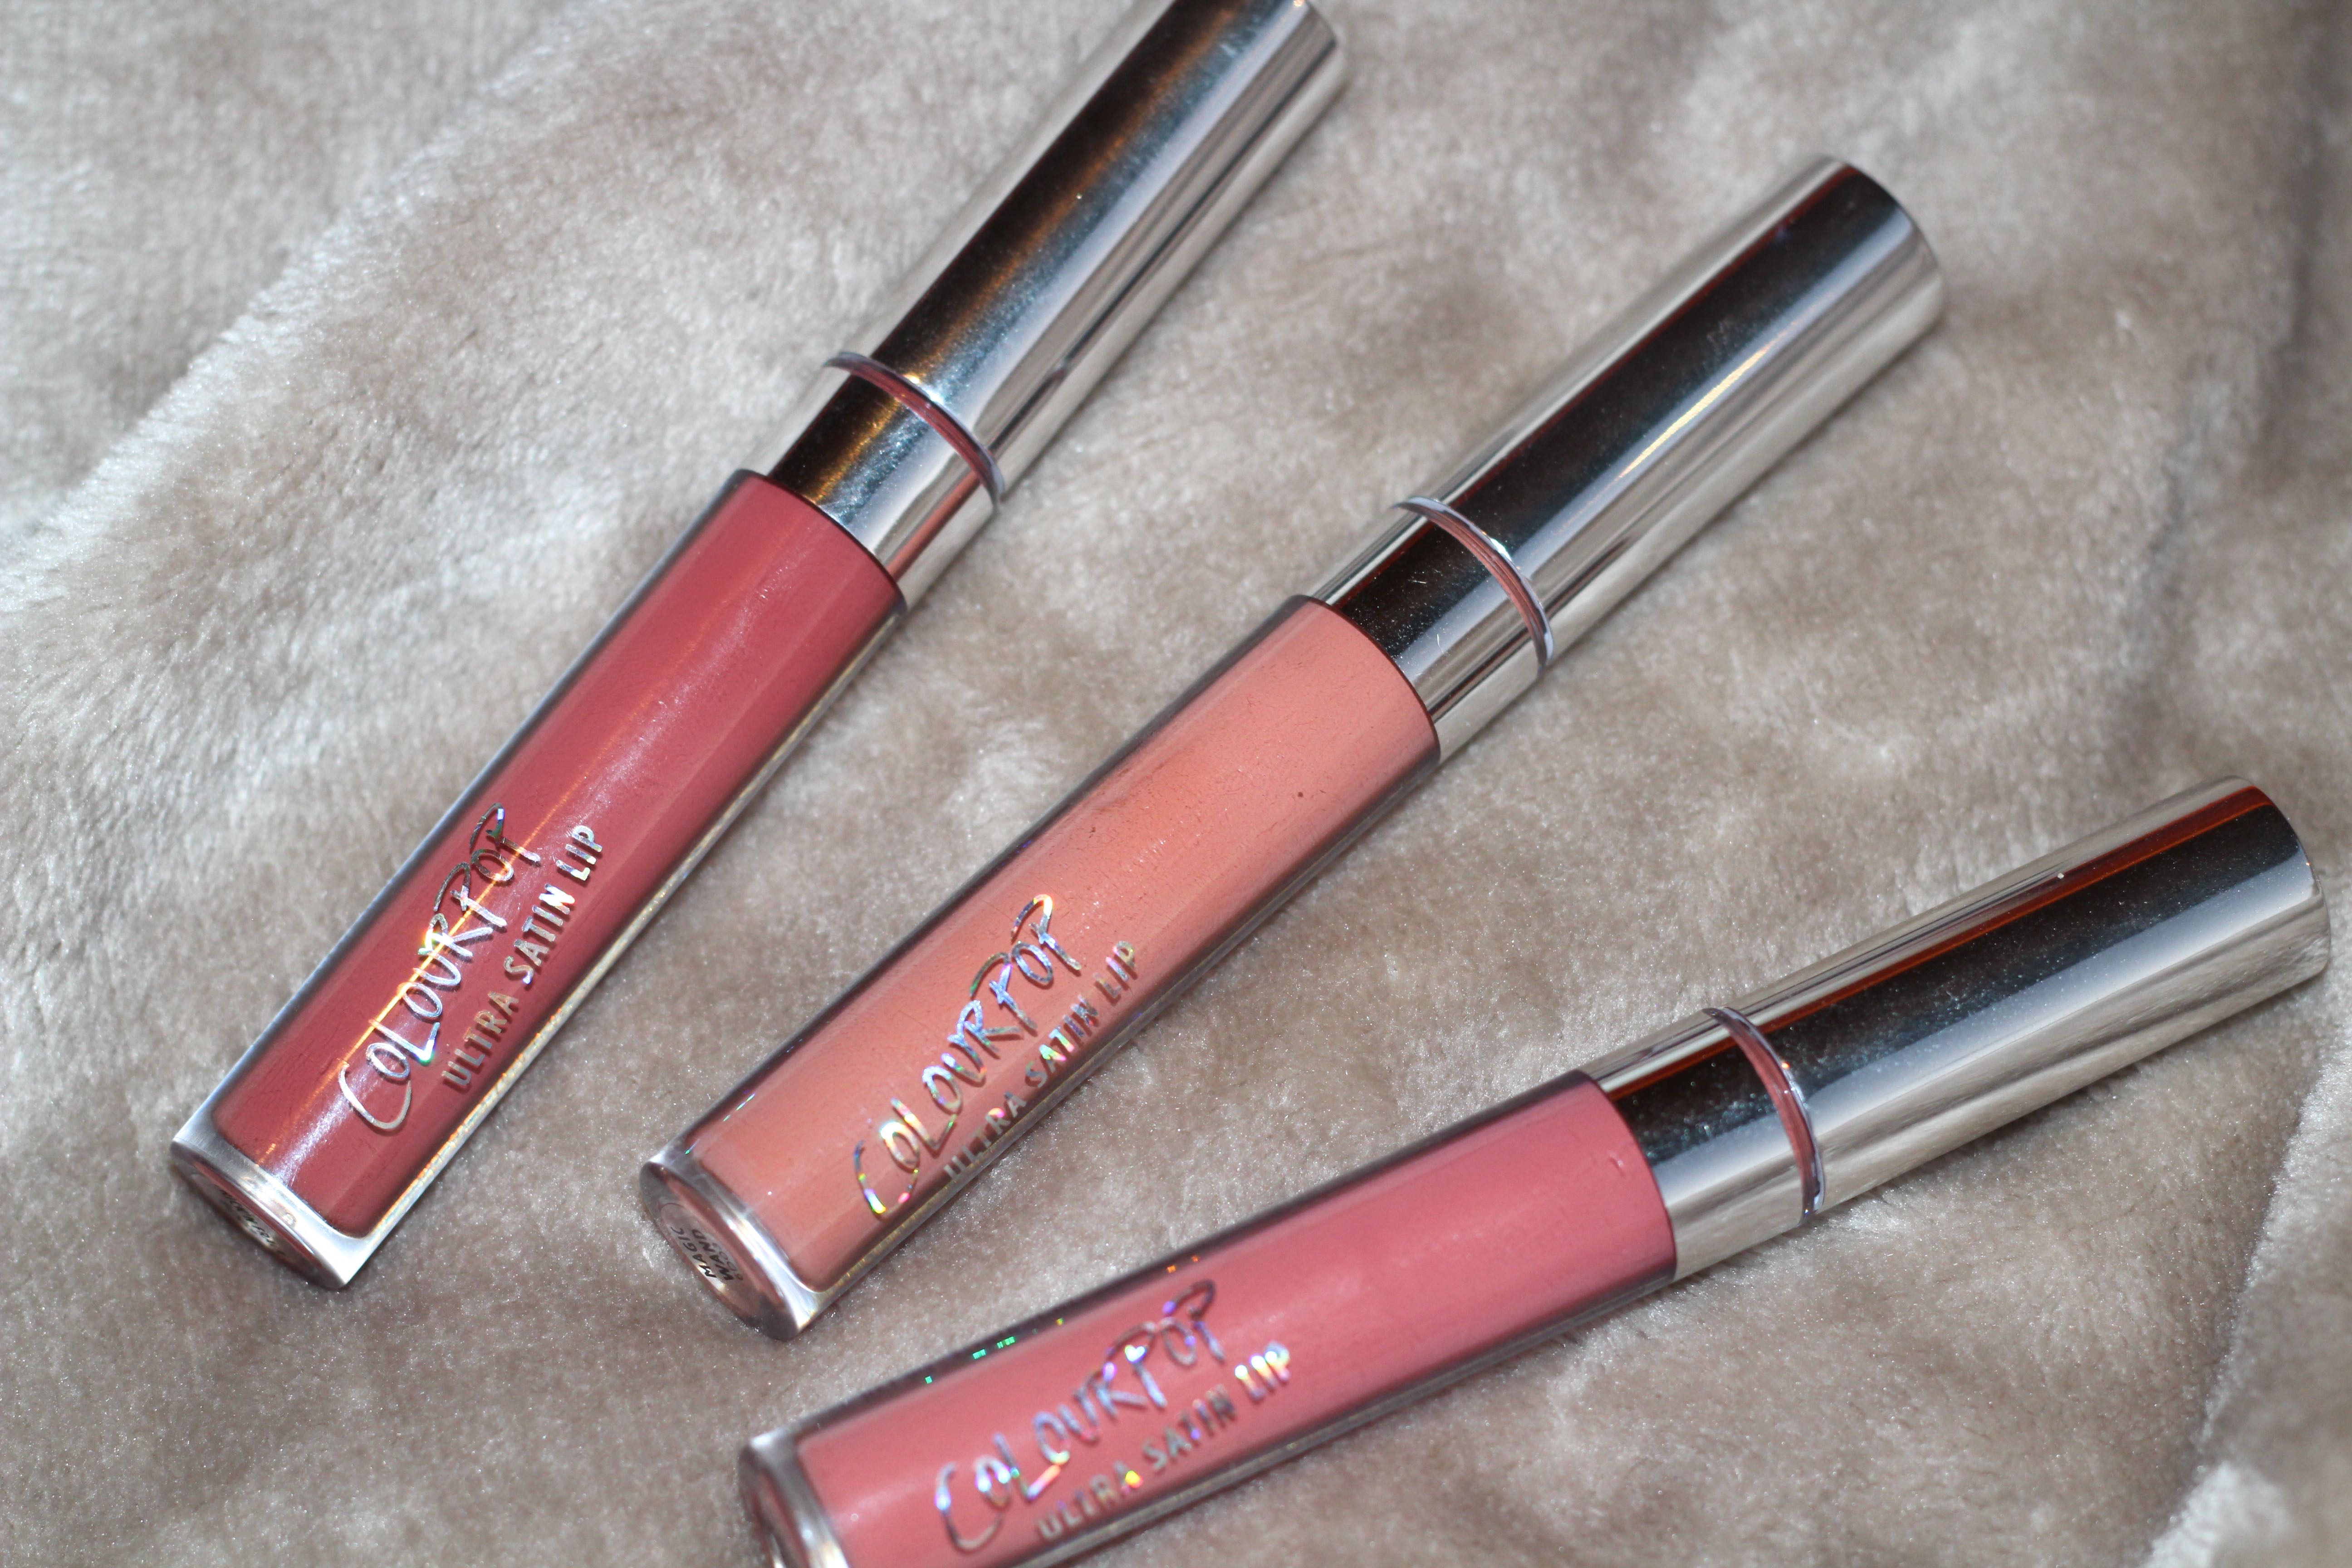 Colourpop Ultra Satin Lip Review - Face Made Up - Beauty Product ...